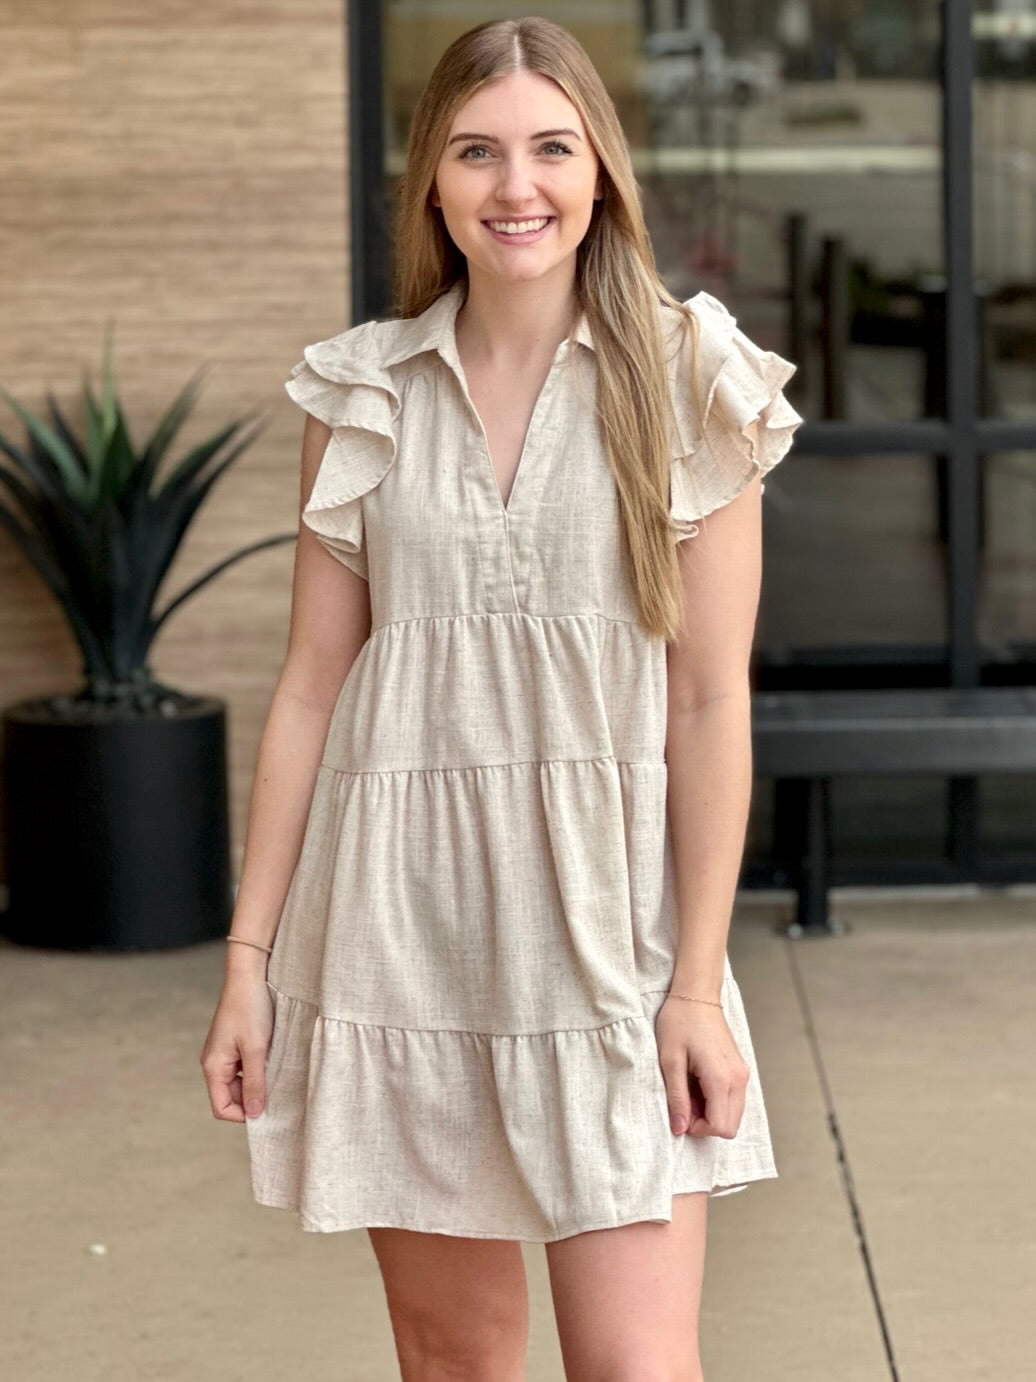 Lexi in oatmeal dress front view smiling